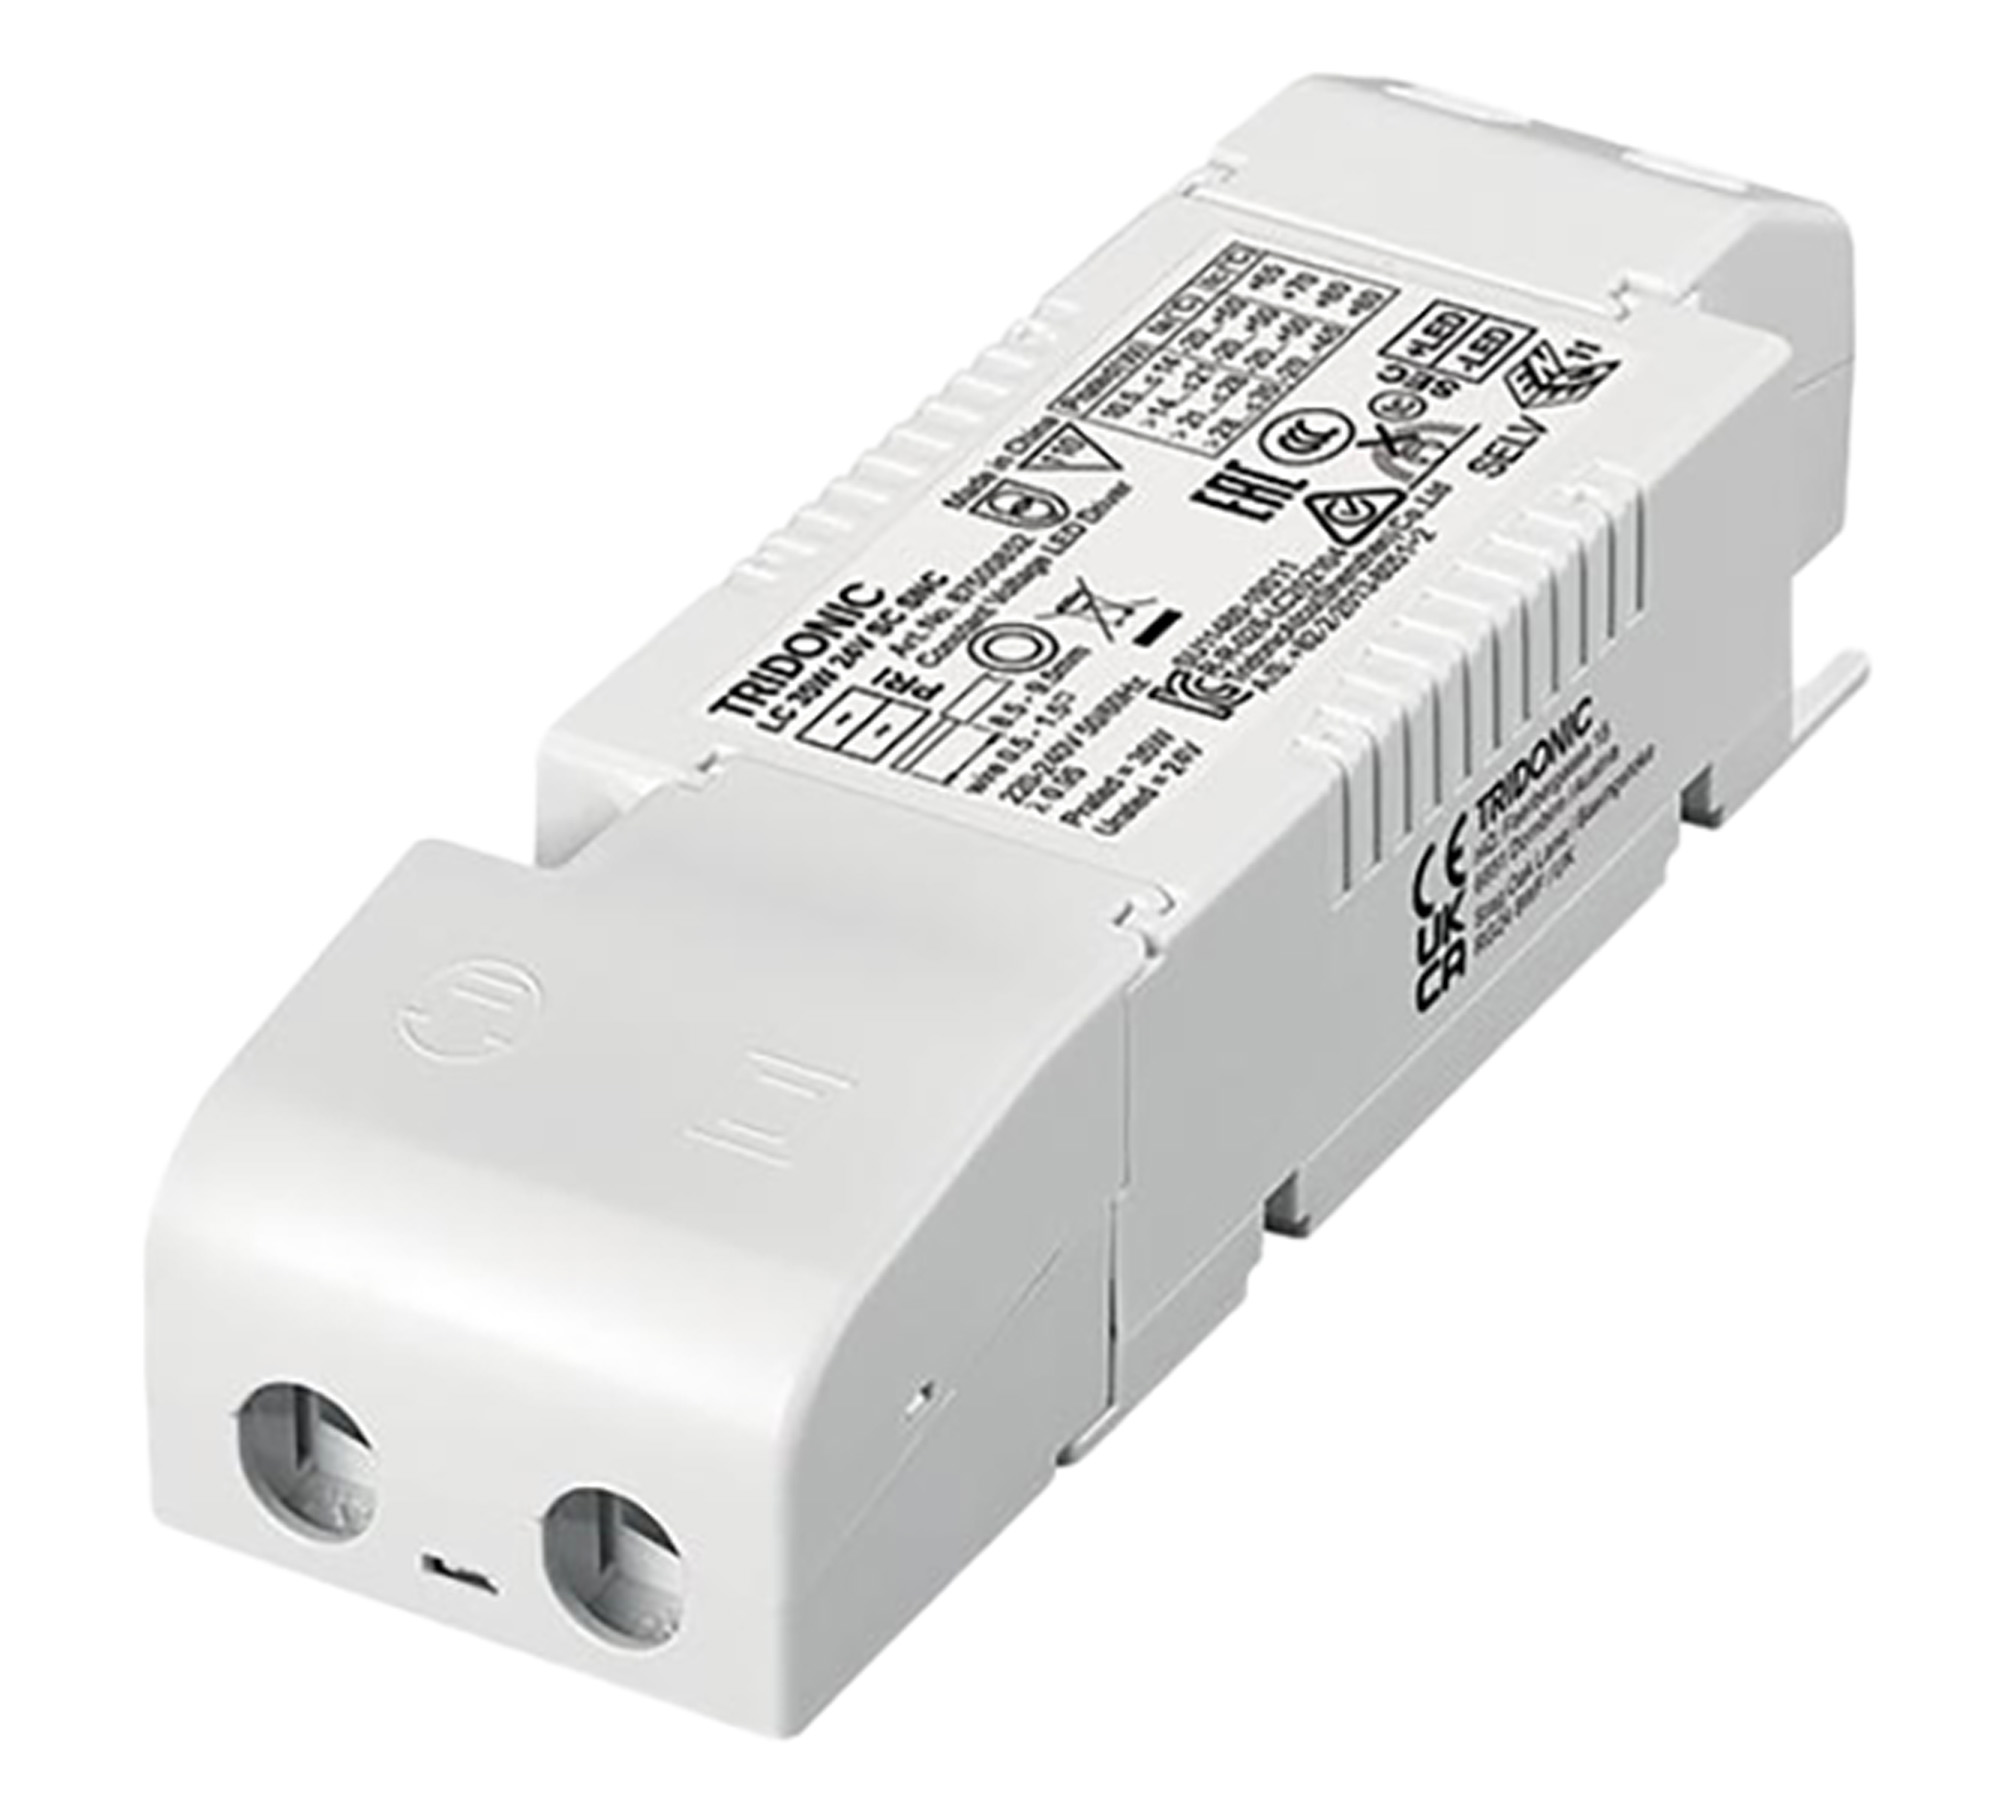 87500852  Tridonic; LC 35W 24V SC SNC ; LED Driver Indoor Constant Voltage ESSENCE; Made In PRC; 5yrs Warranty